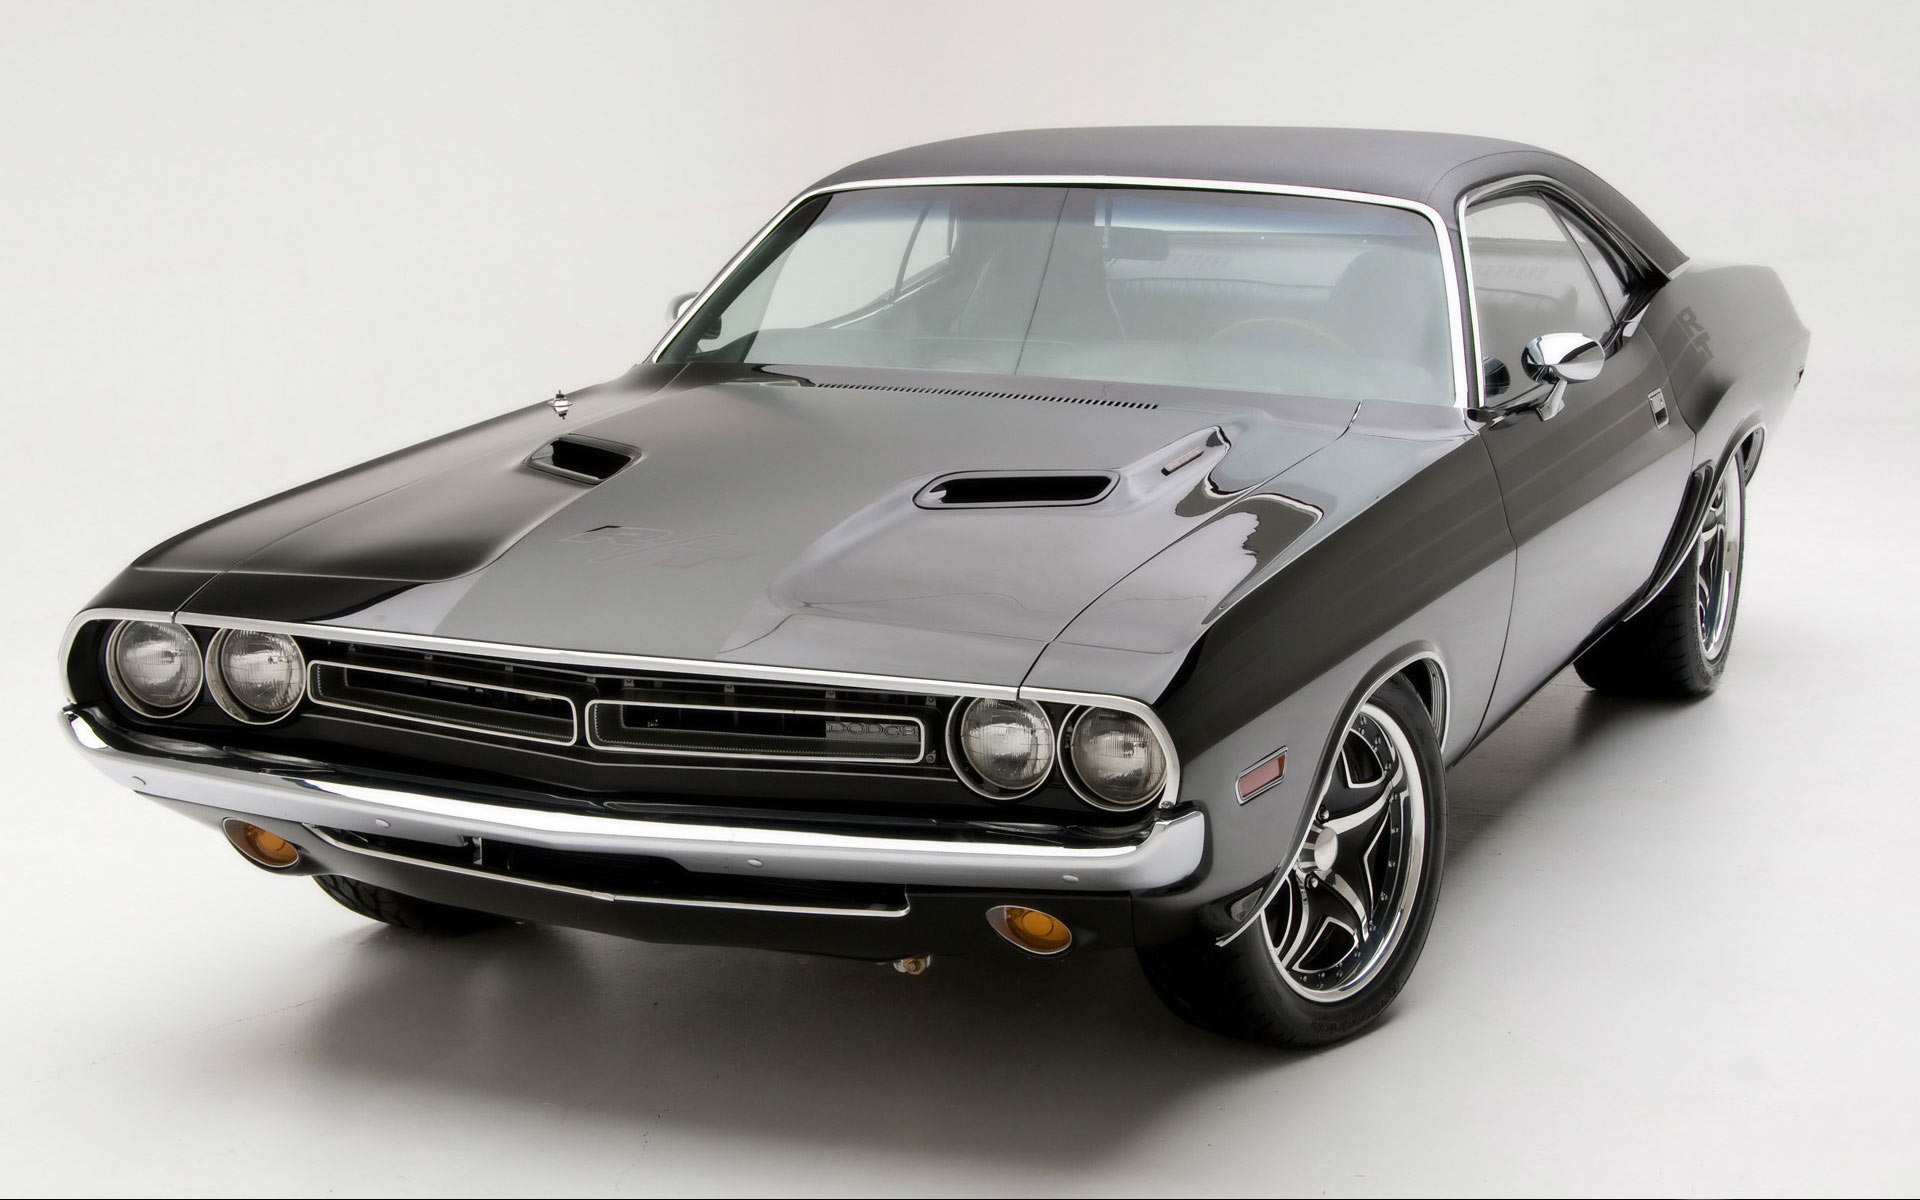 cars, Muscle, Cars, Dodge, Vehicles Wallpaper